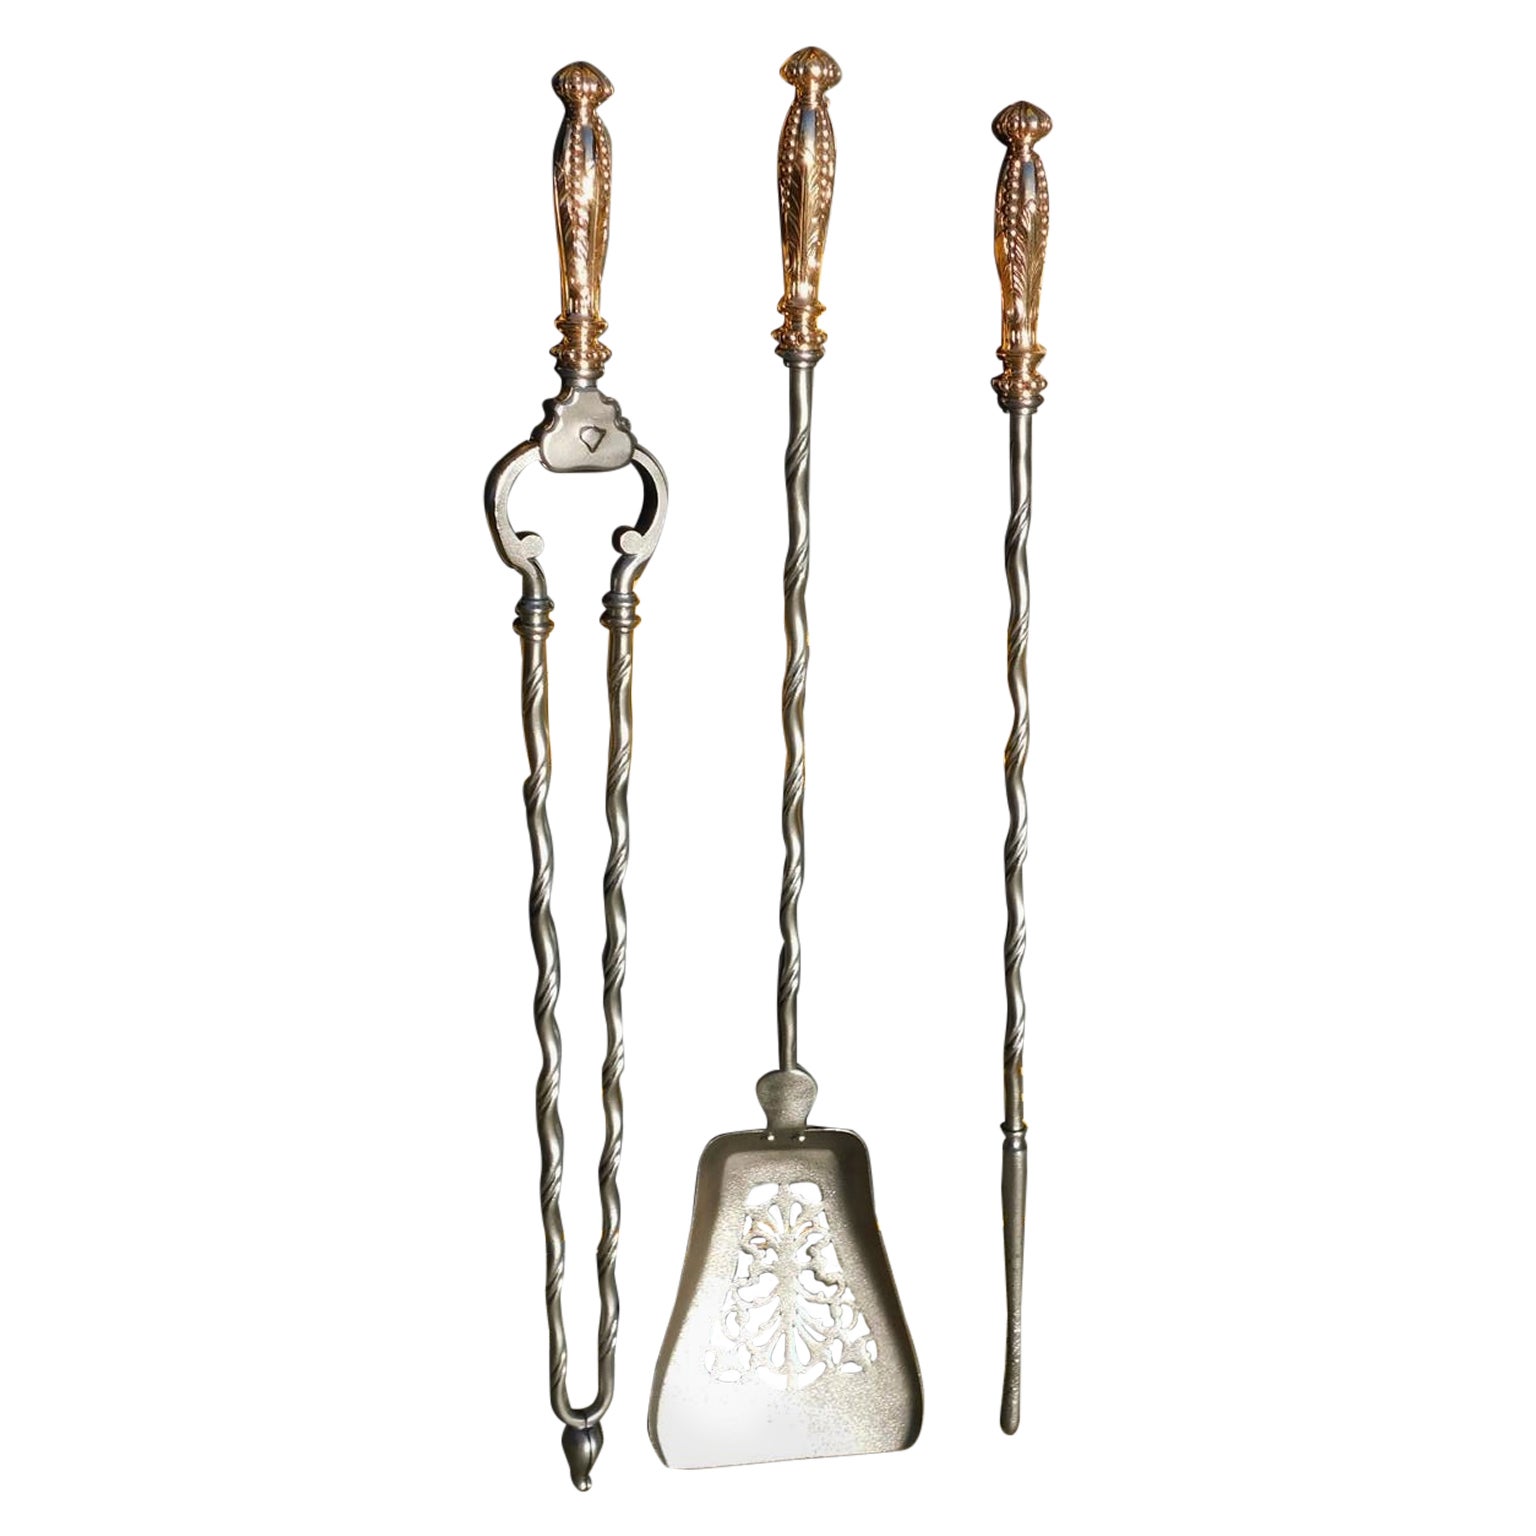 Set of English Brass and Polished Steel Pierced Foliage Fire Tools, Circa 1800 For Sale